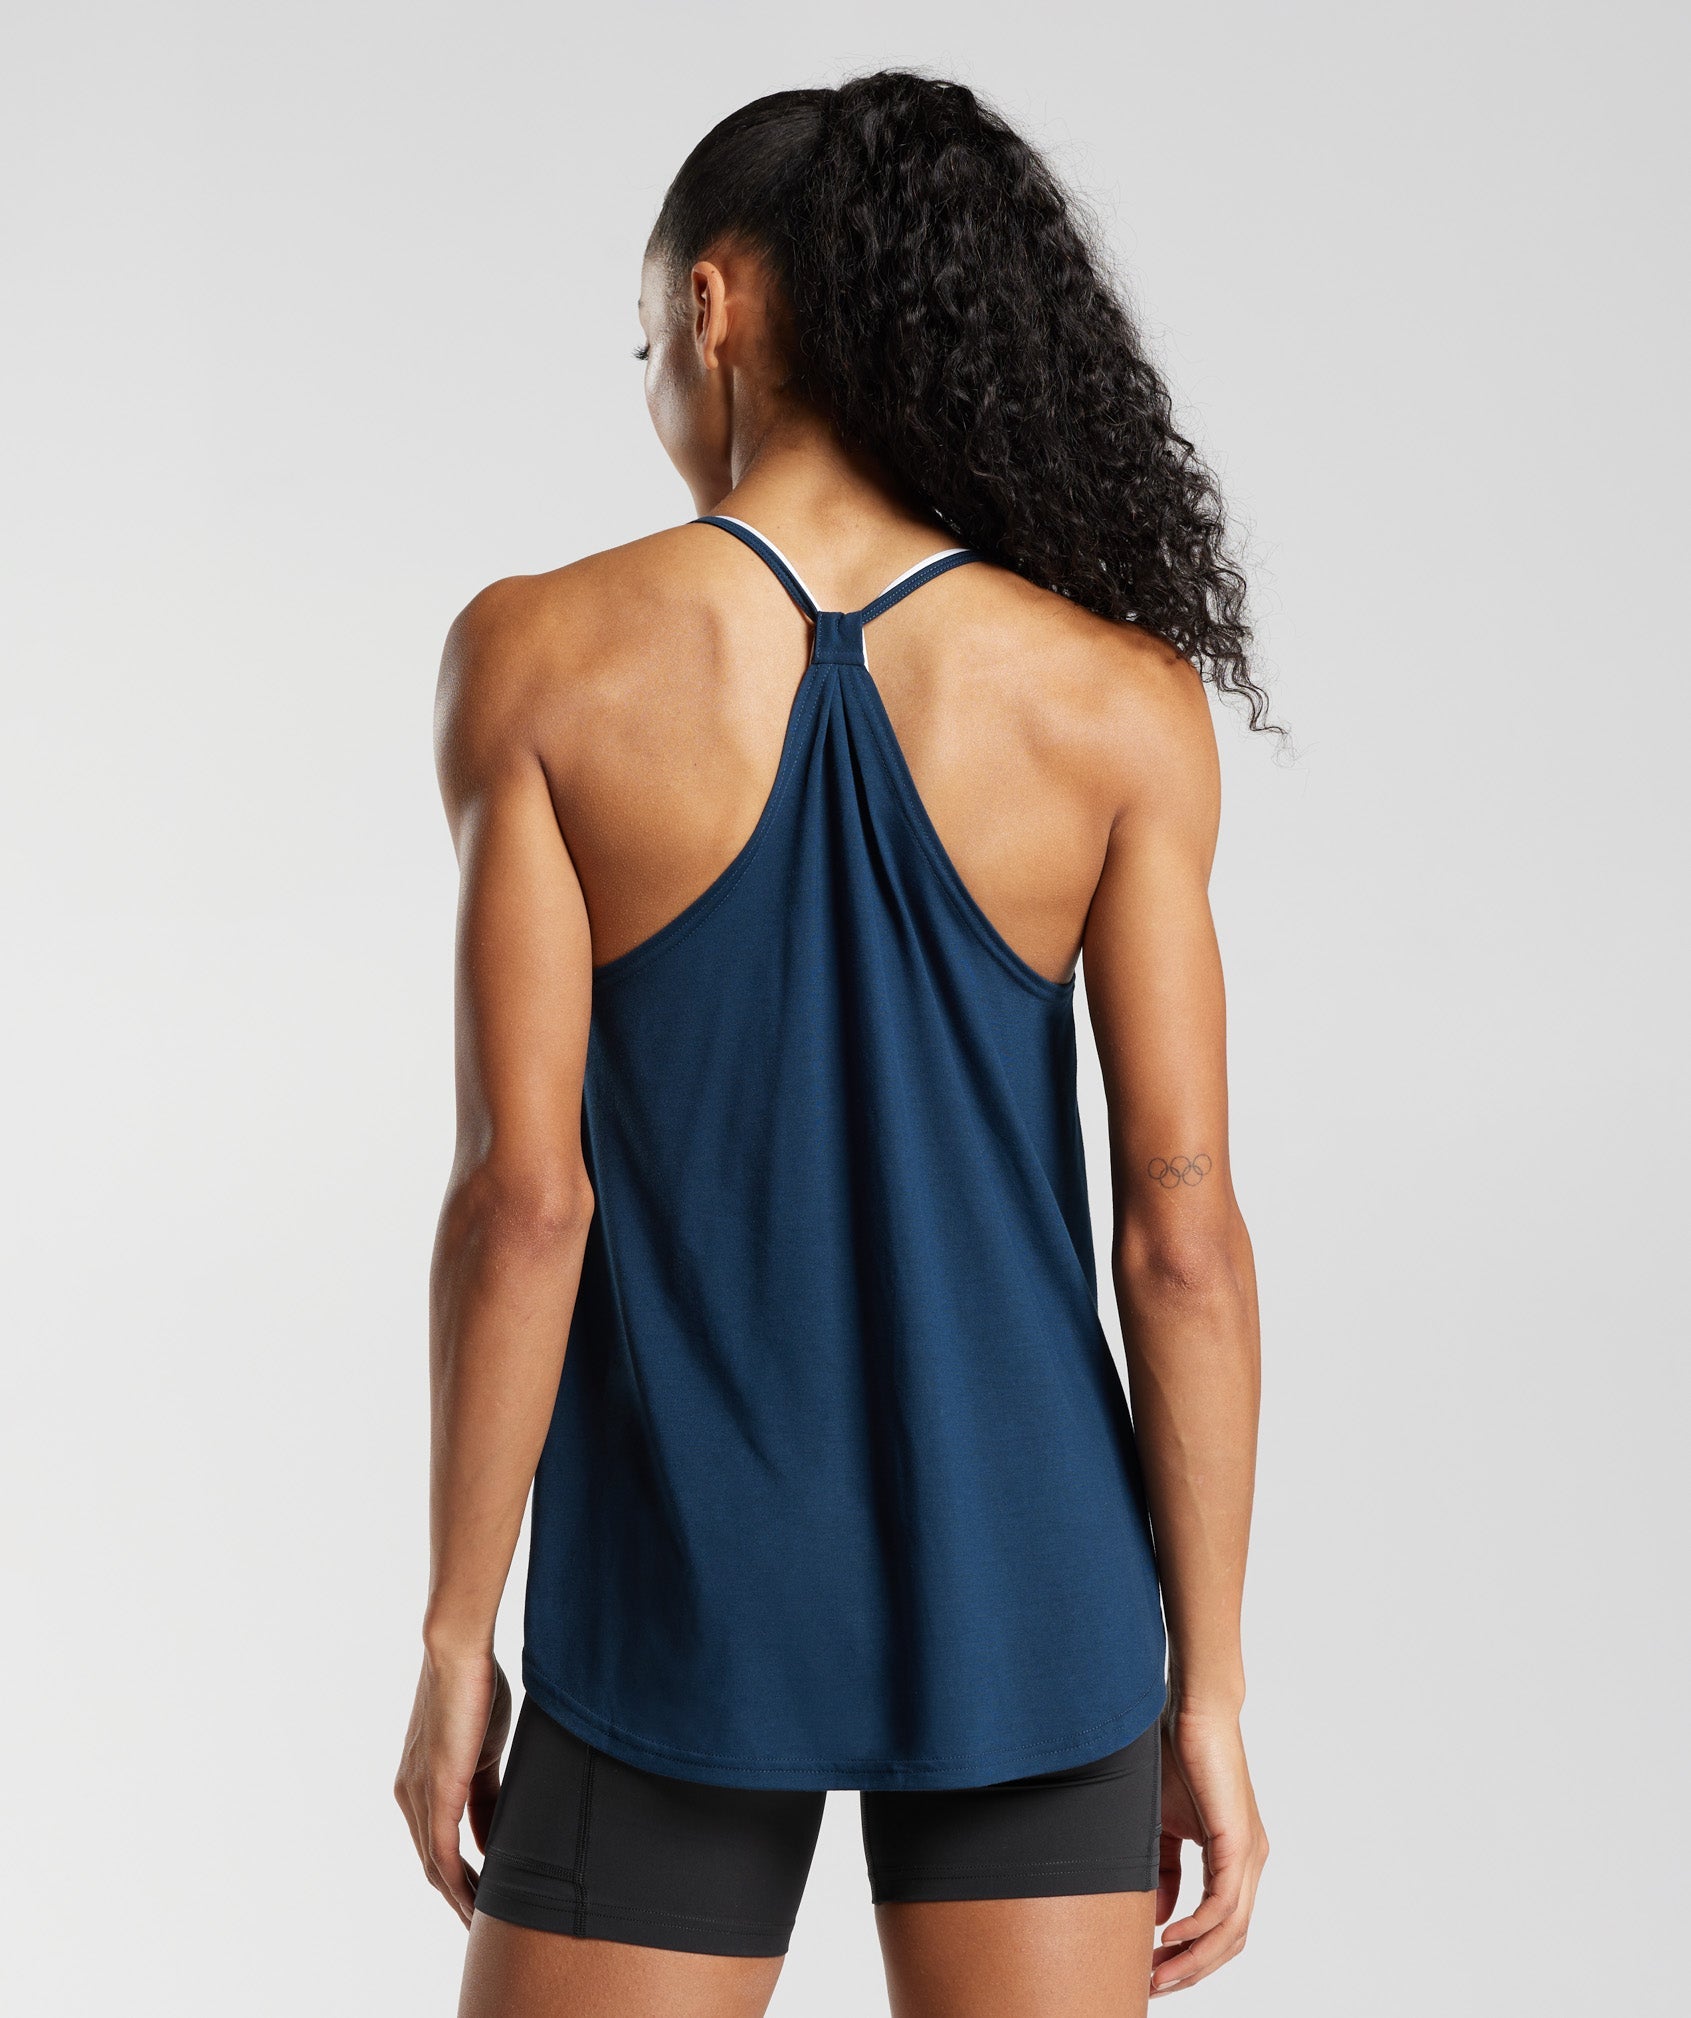 Super Soft Tank in Navy - view 2